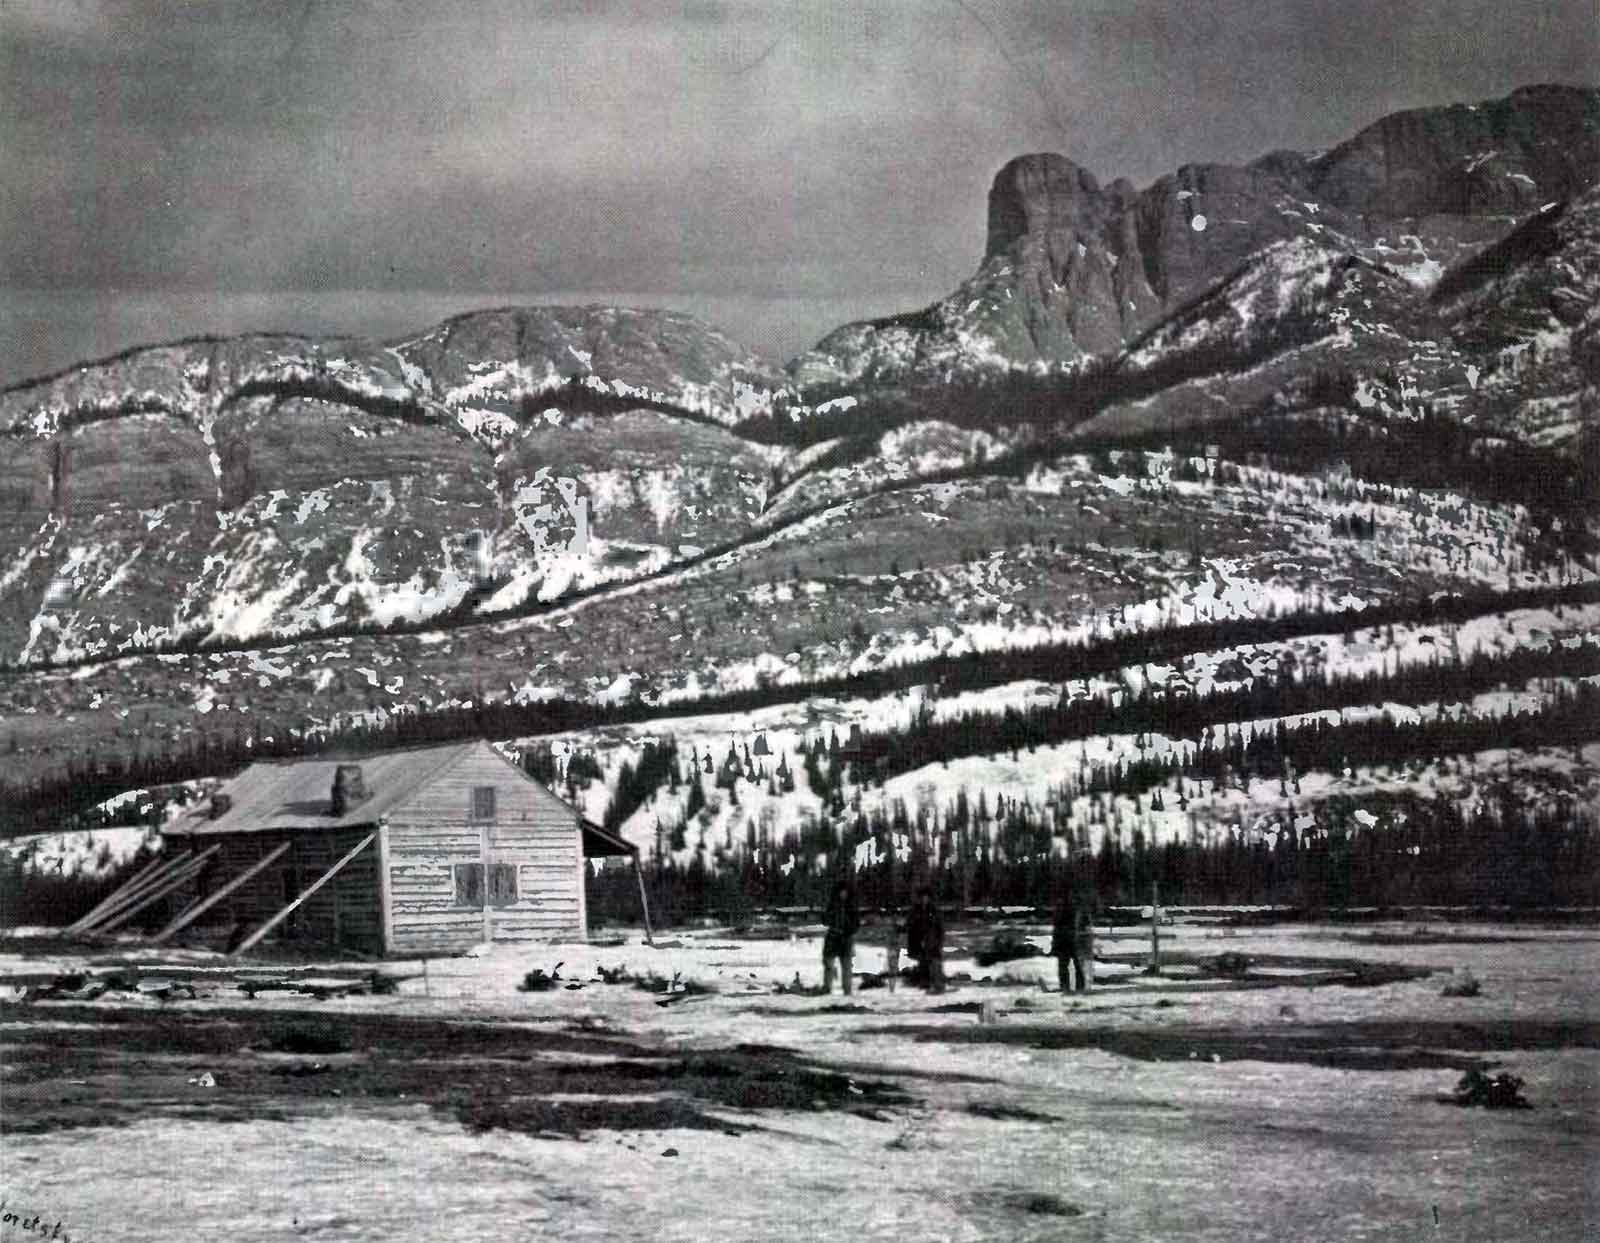 Jasper House and Roche Miette, Sandford Fleming expedition. Photo: Charles Horetzky, 1872